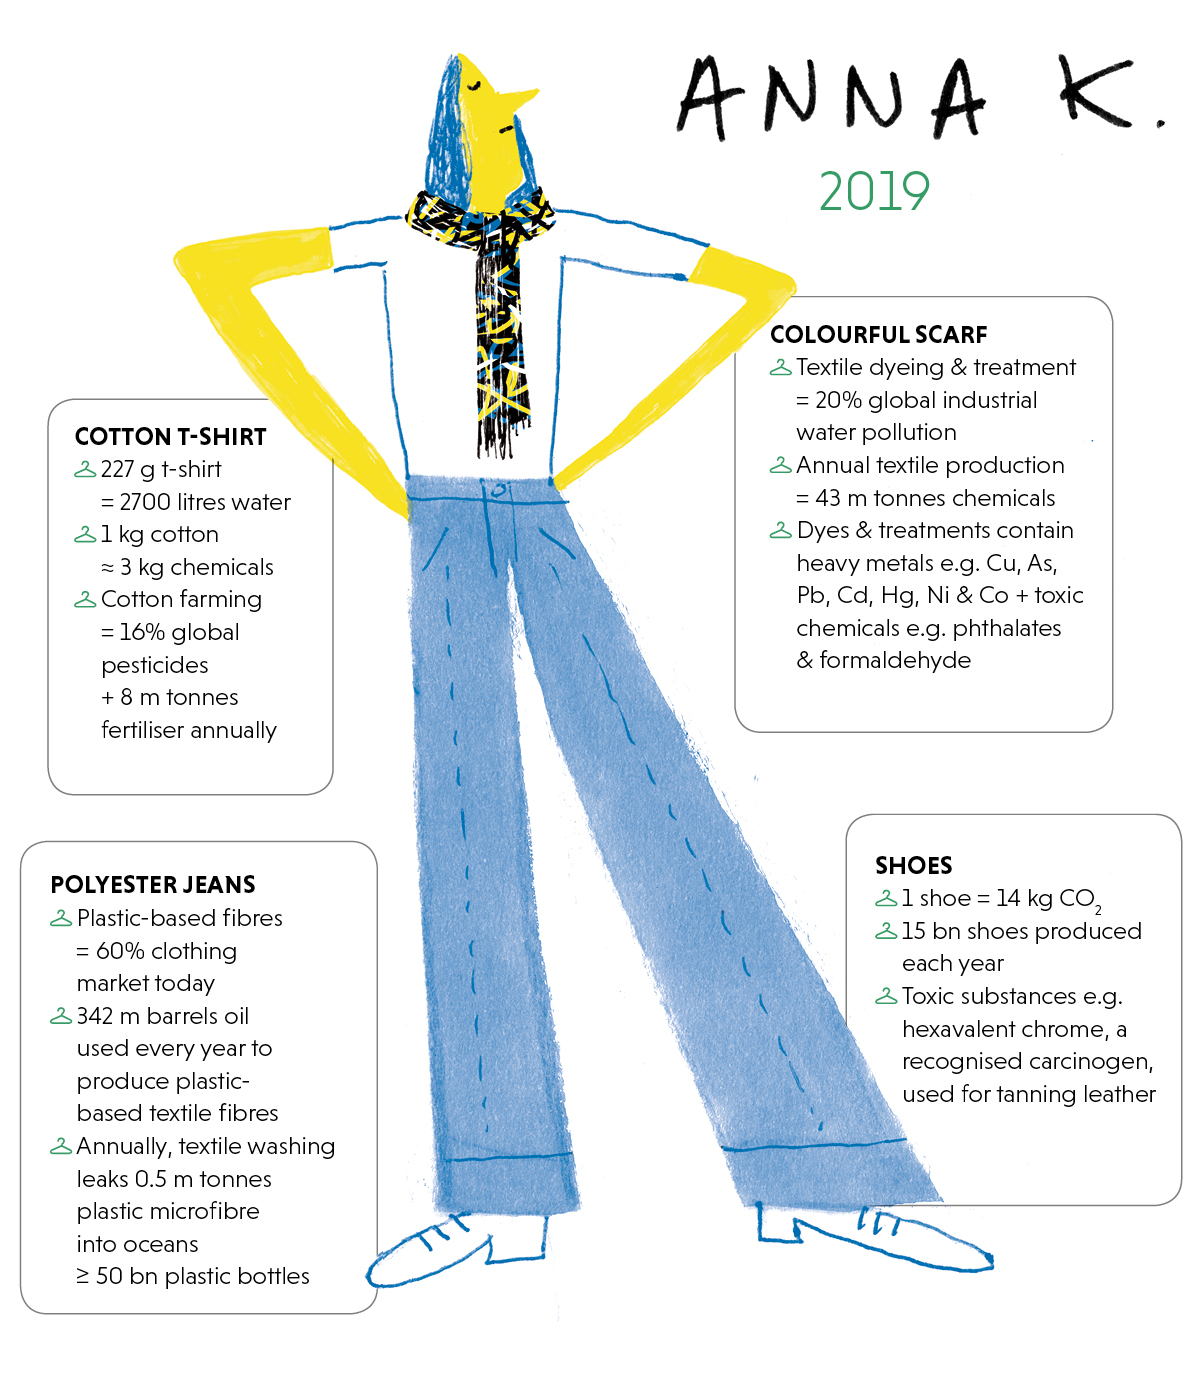 Infographic showing the outfit of Anna K in 2019 and its social, health and environmental impacts